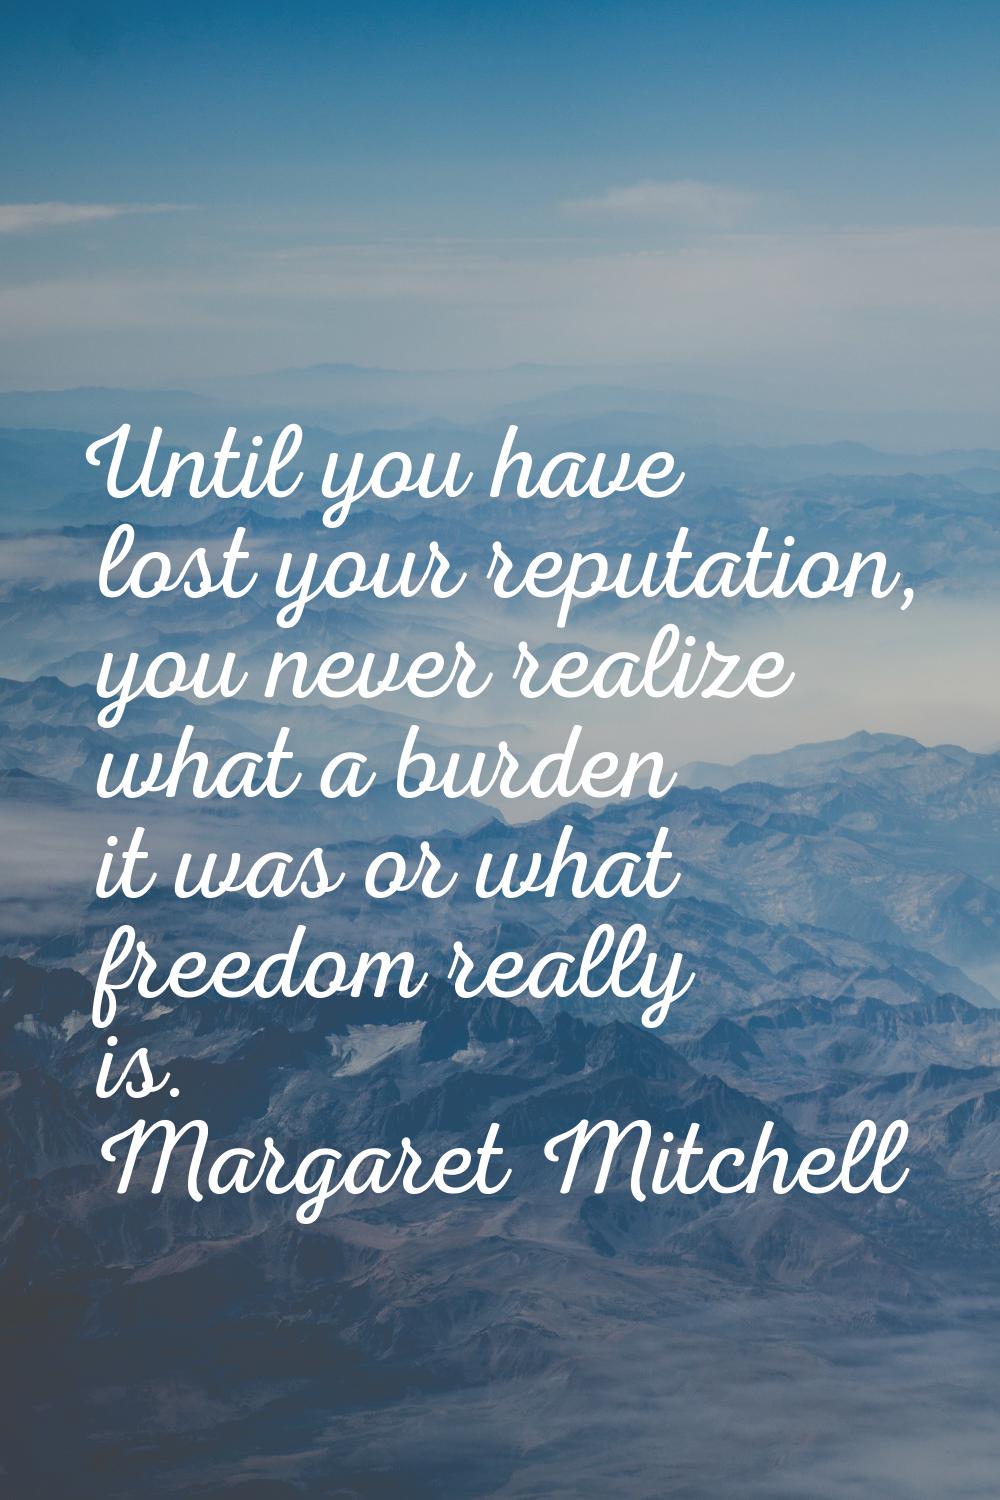 Until you have lost your reputation, you never realize what a burden it was or what freedom really 